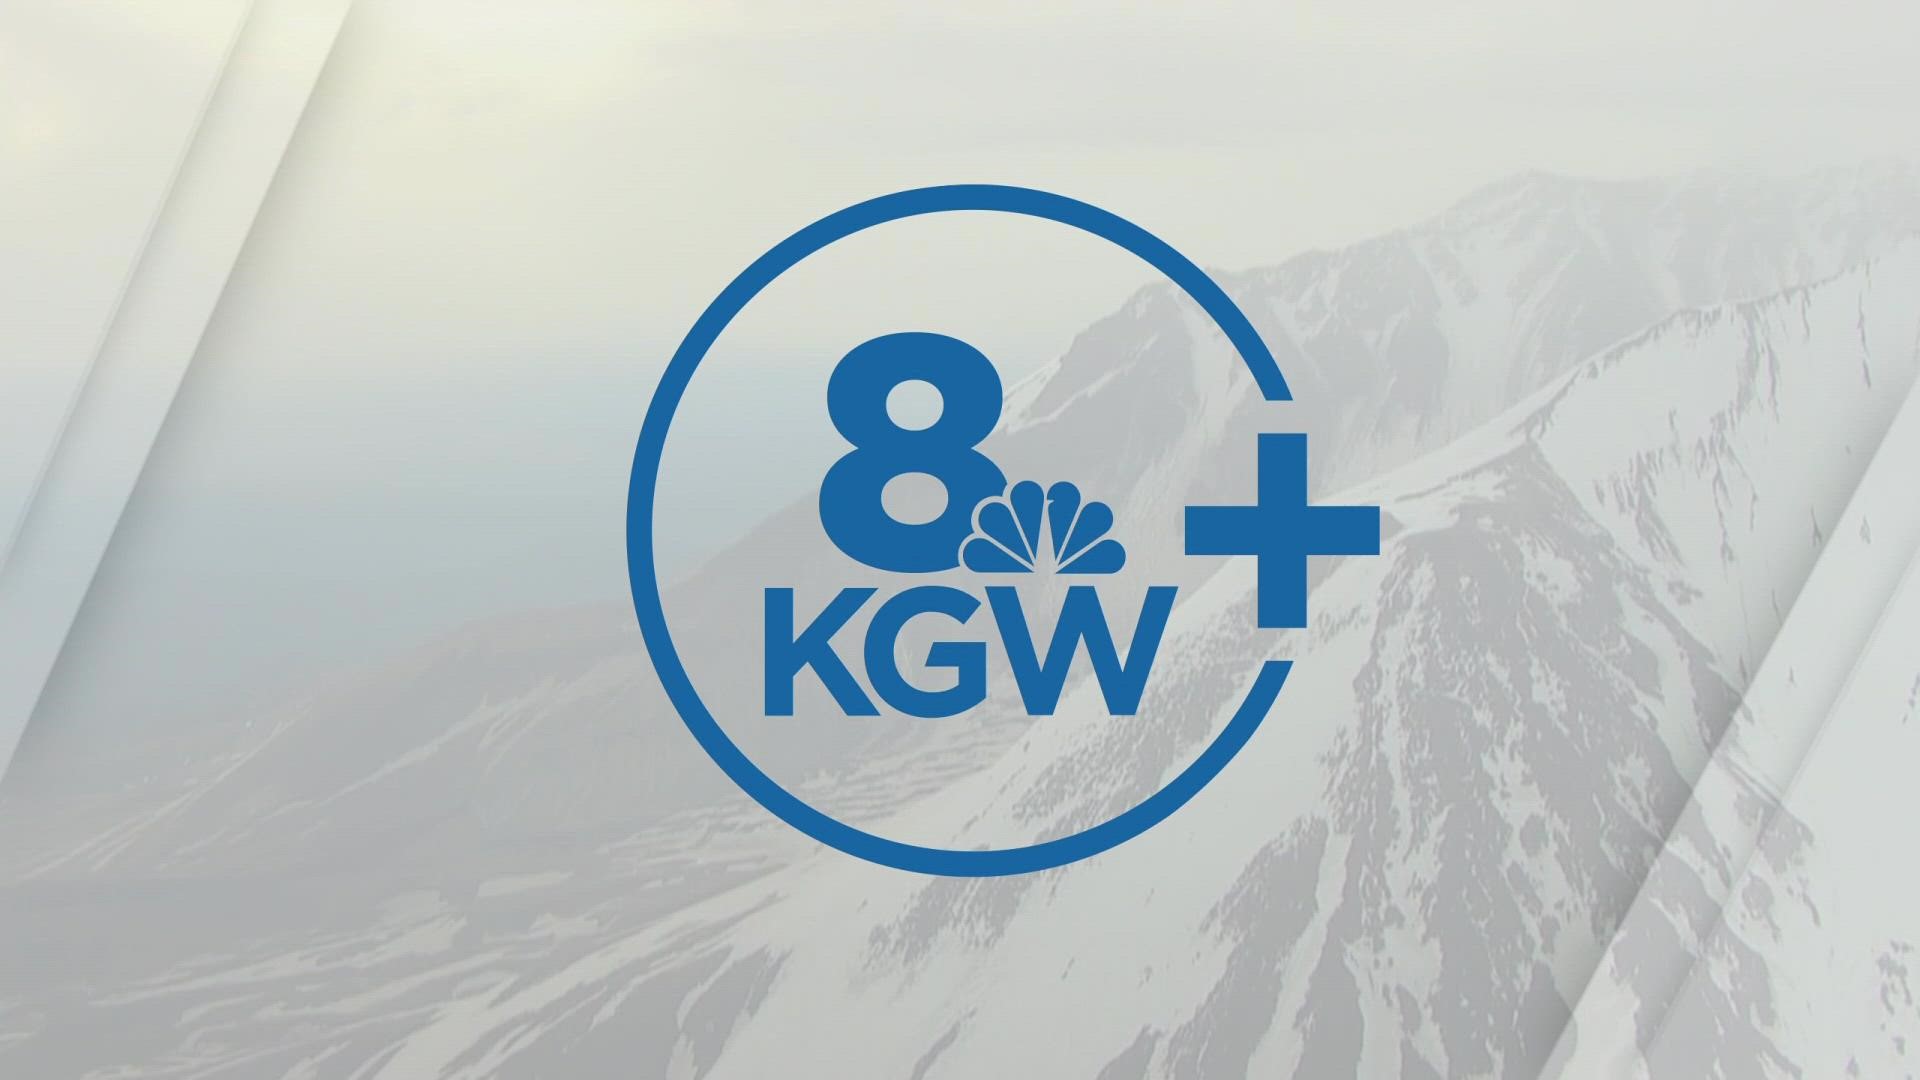 Dramatic KGW aerials of Mount St. Helens captured on the 40th anniversary of the May, 18th 1980 eruption showing the cauldron and snow-covered sheer cliffs.